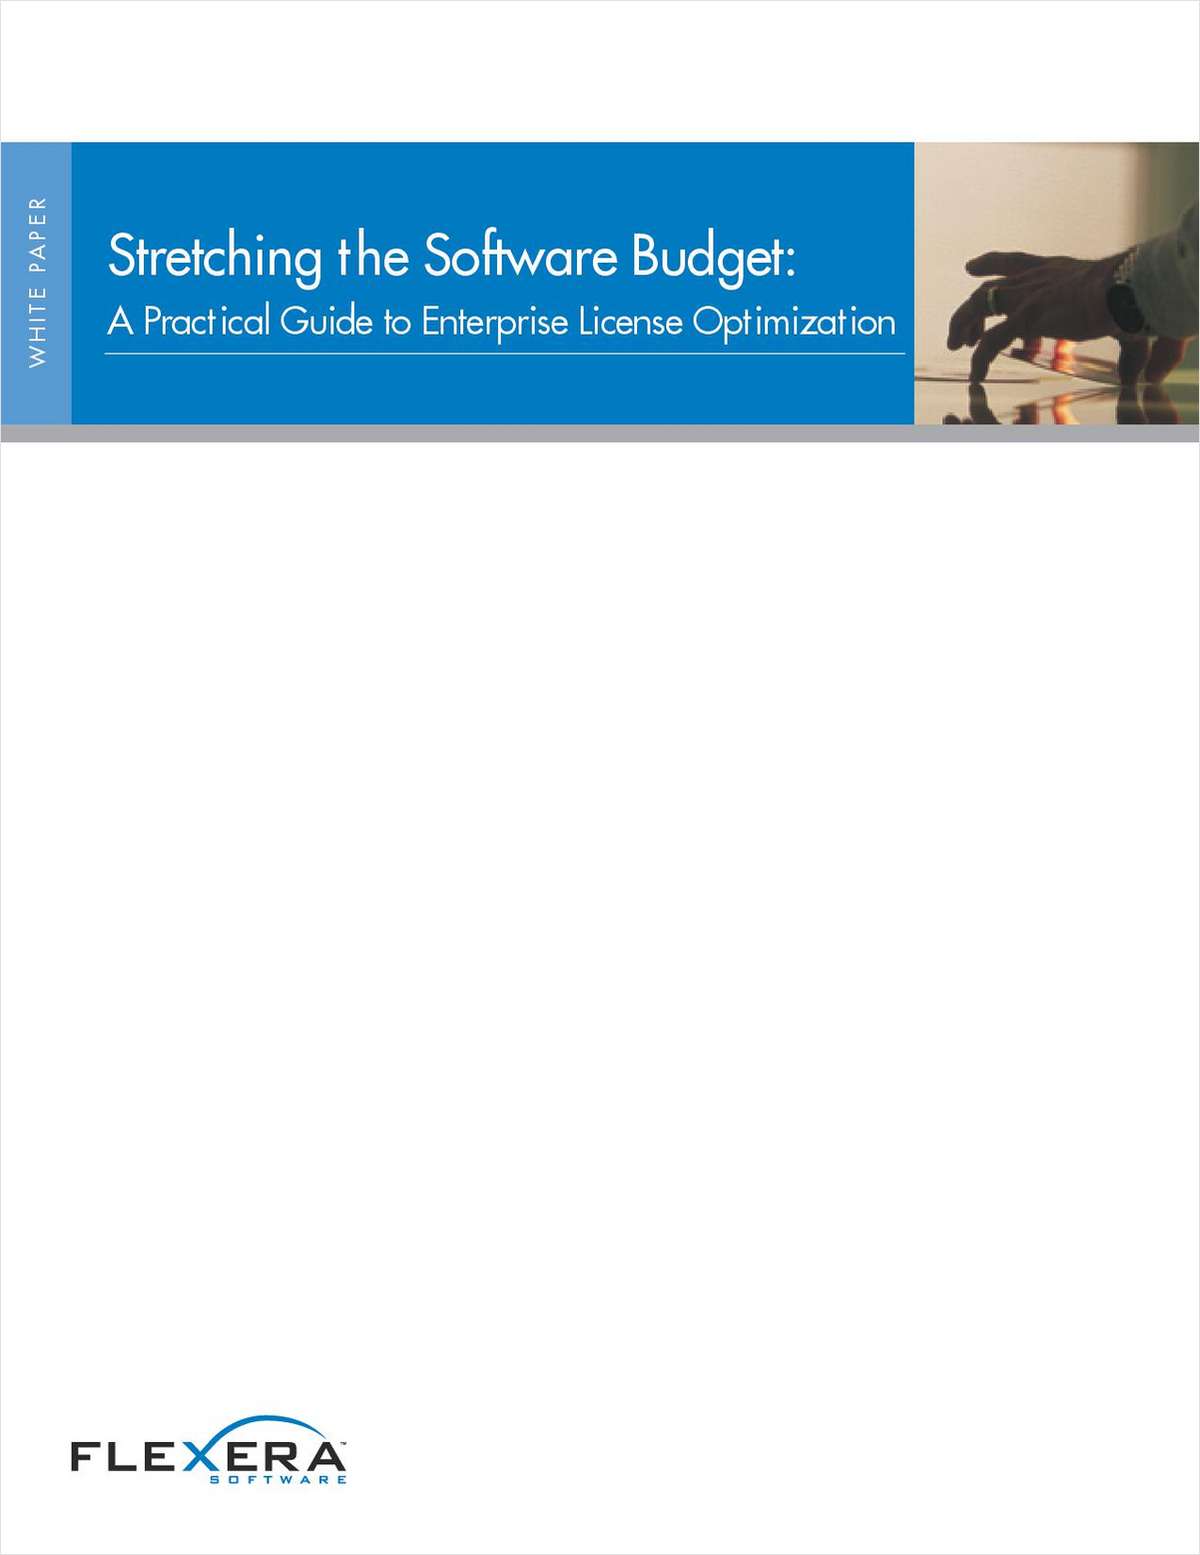 Stretching the Software Budget with Enterprise License Optimization